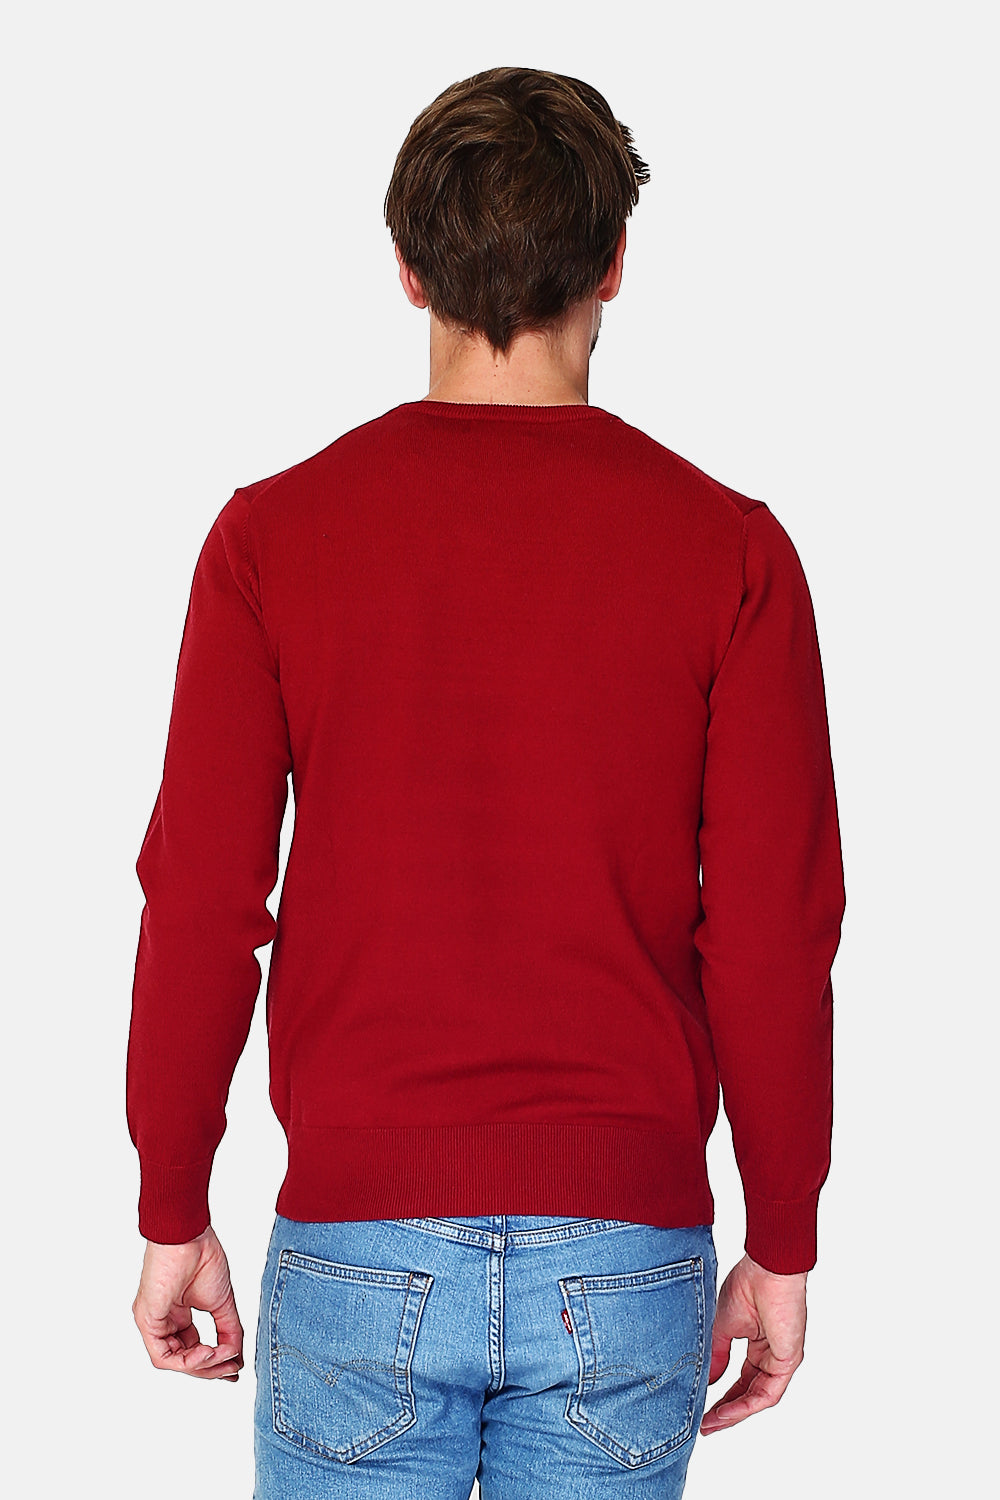 Classic crewneck sweater with long sleeves 3-ply knit